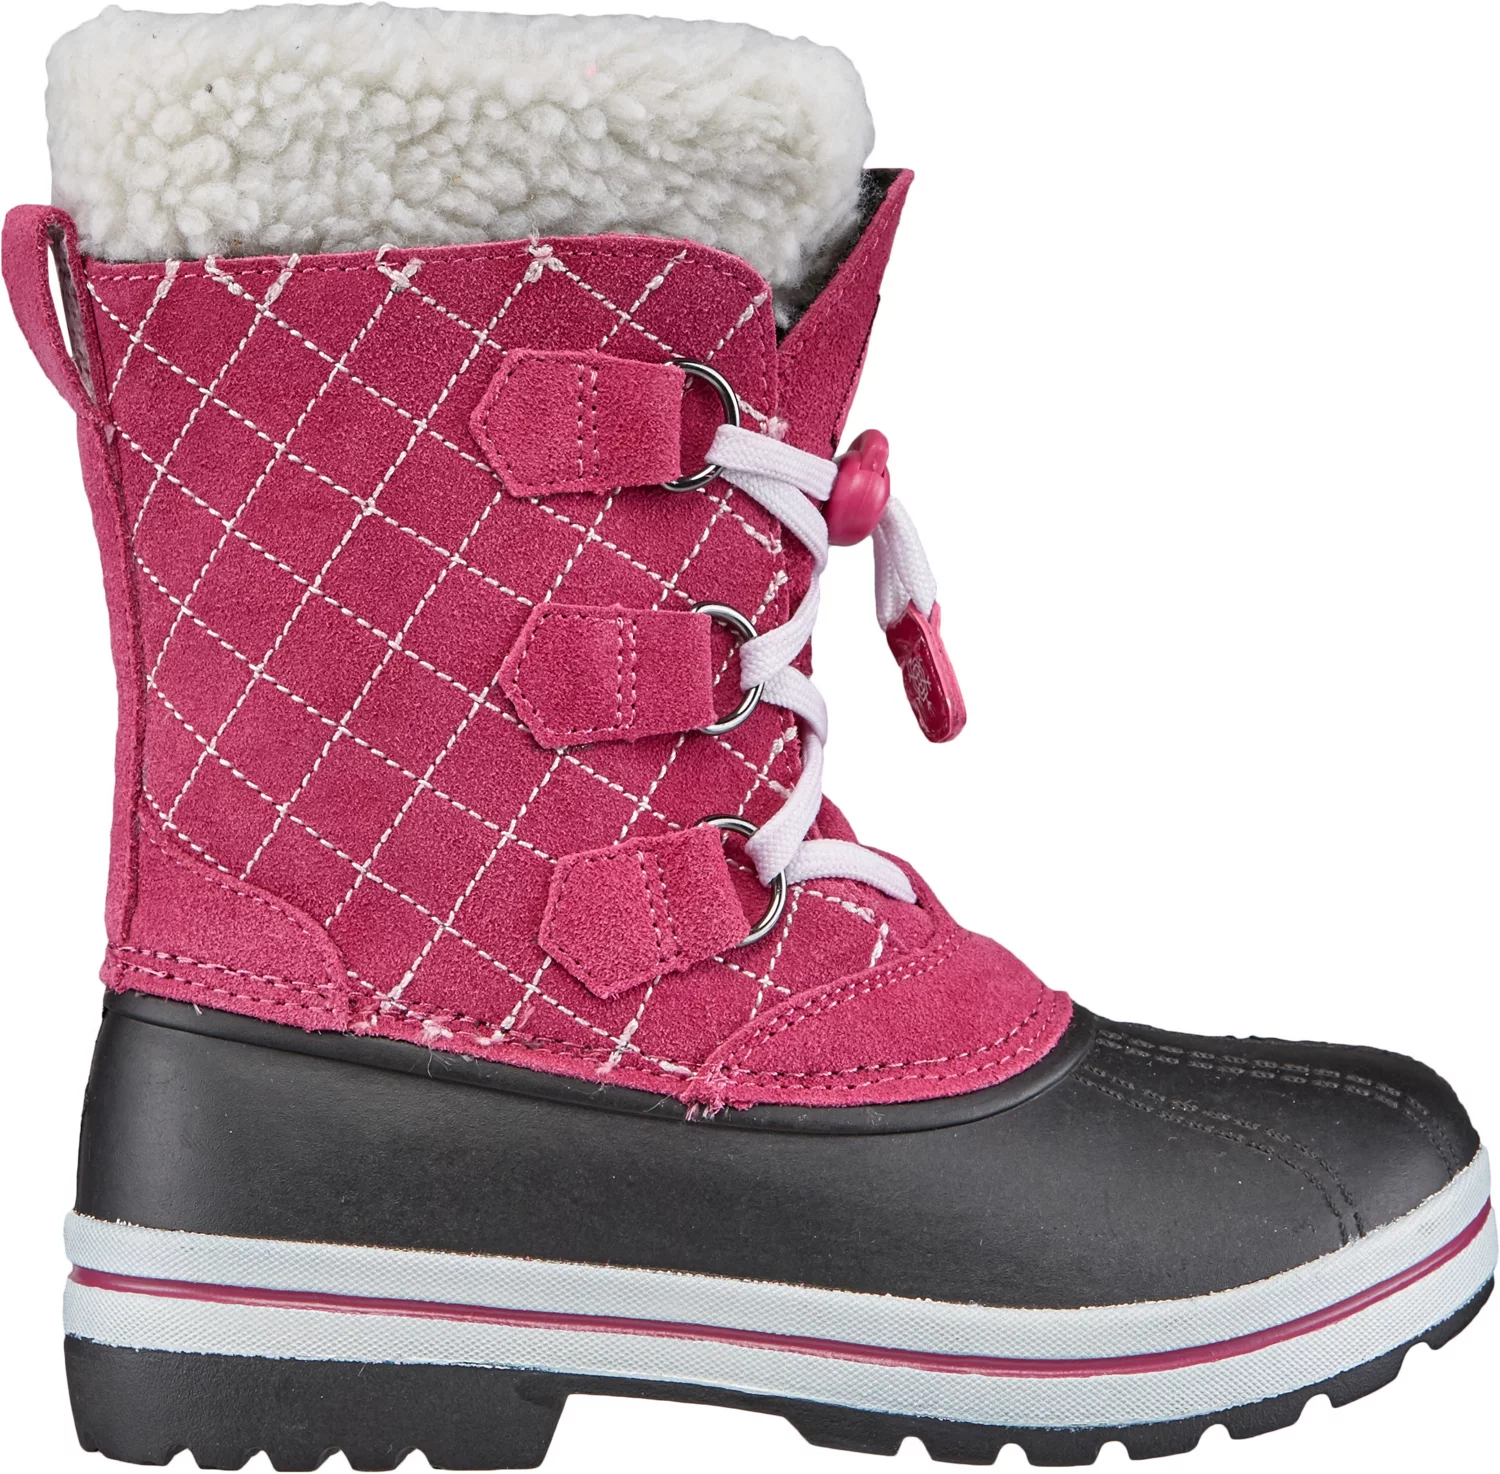 Girls' Boots | Boots For Girls | Academy